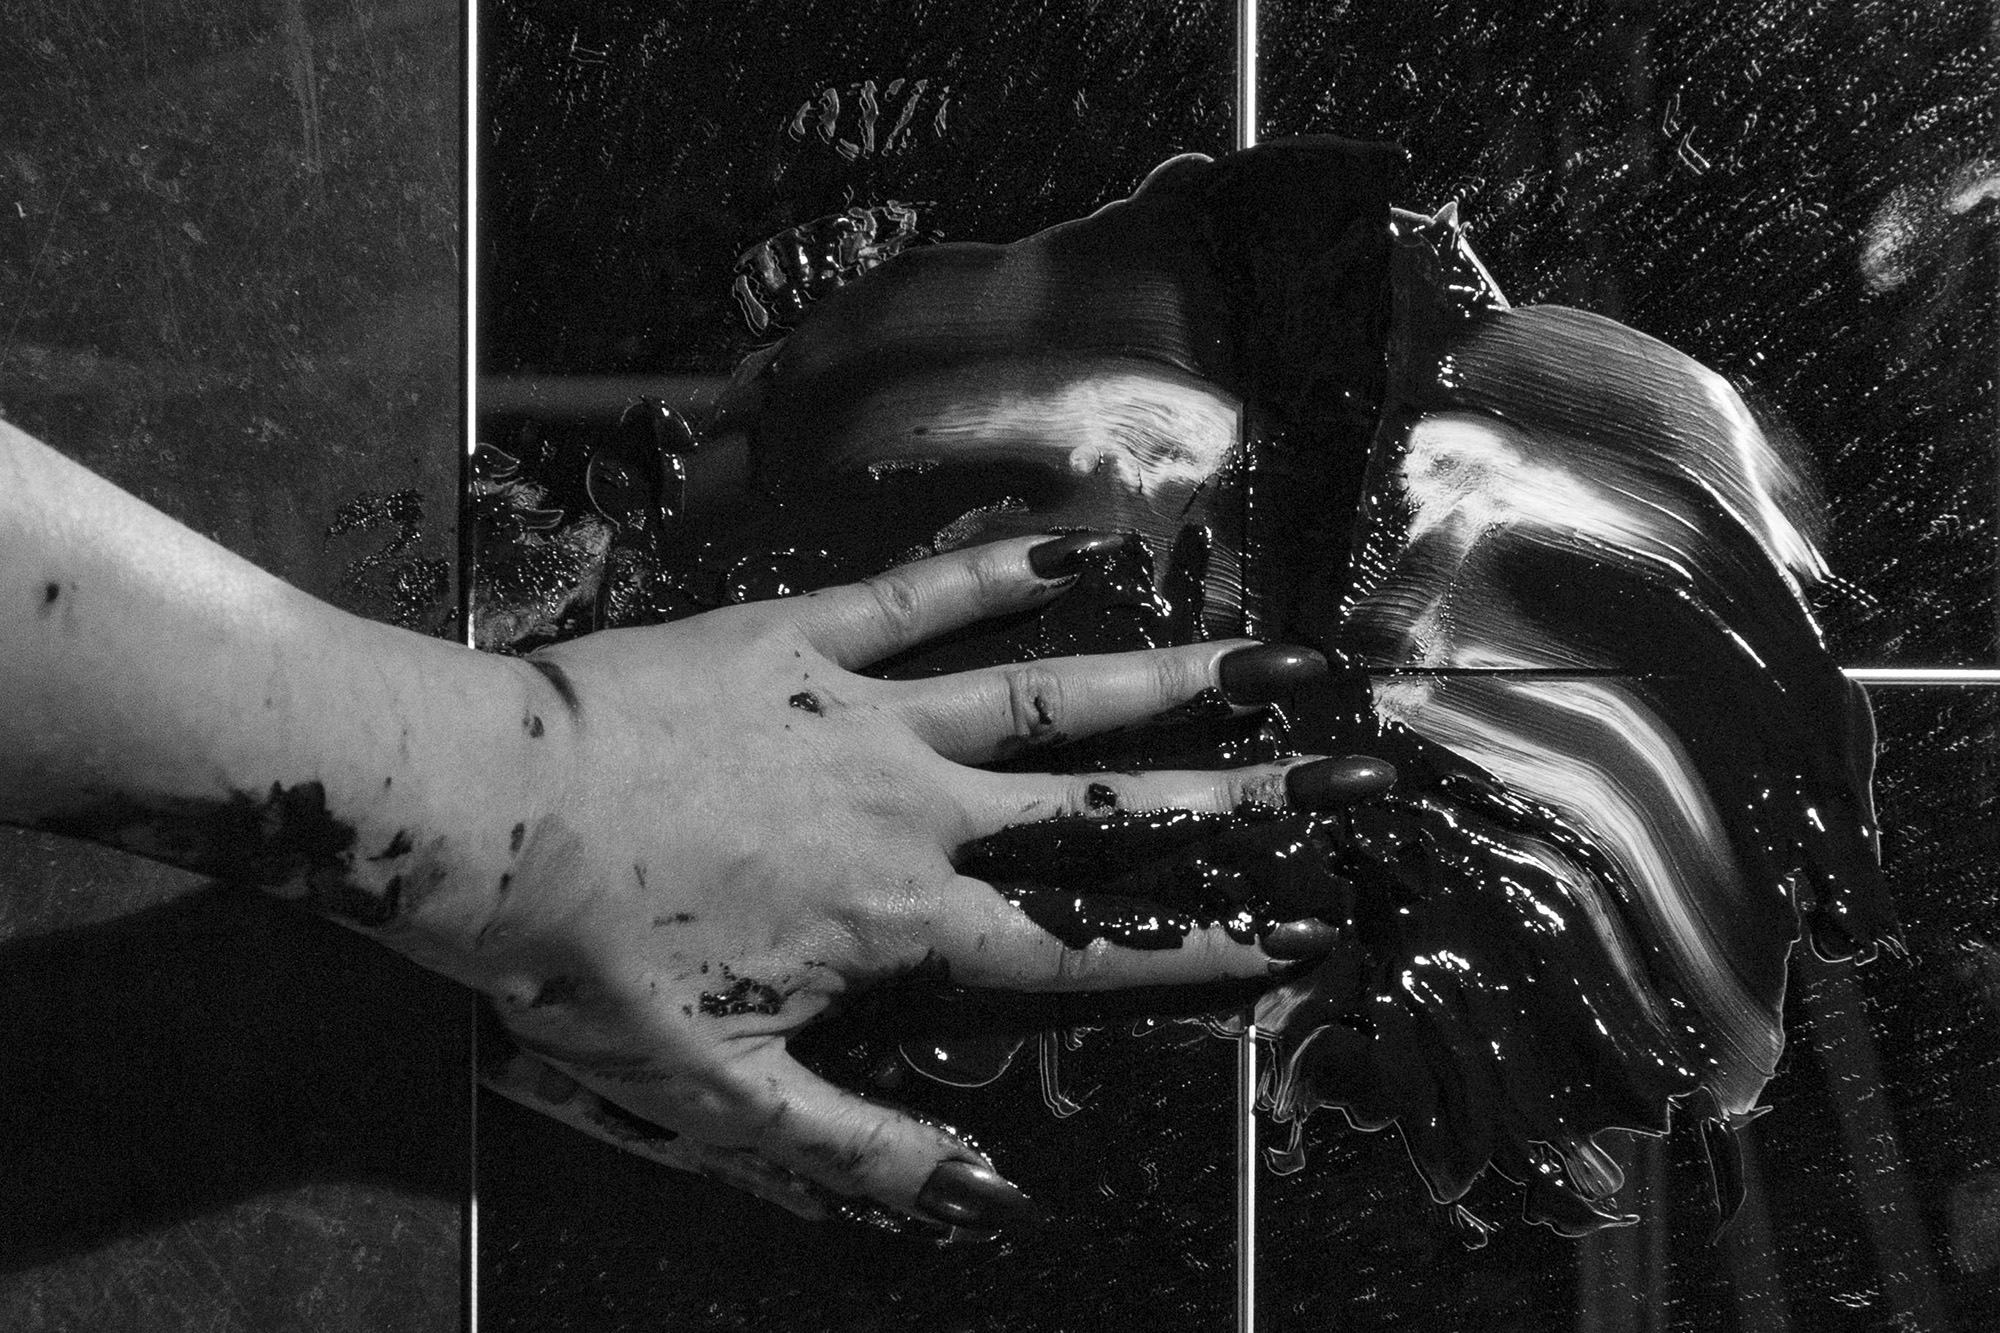 4. Still of the performance 'Beast Witout Hands', with Zuzanna Zgierska, 2018.